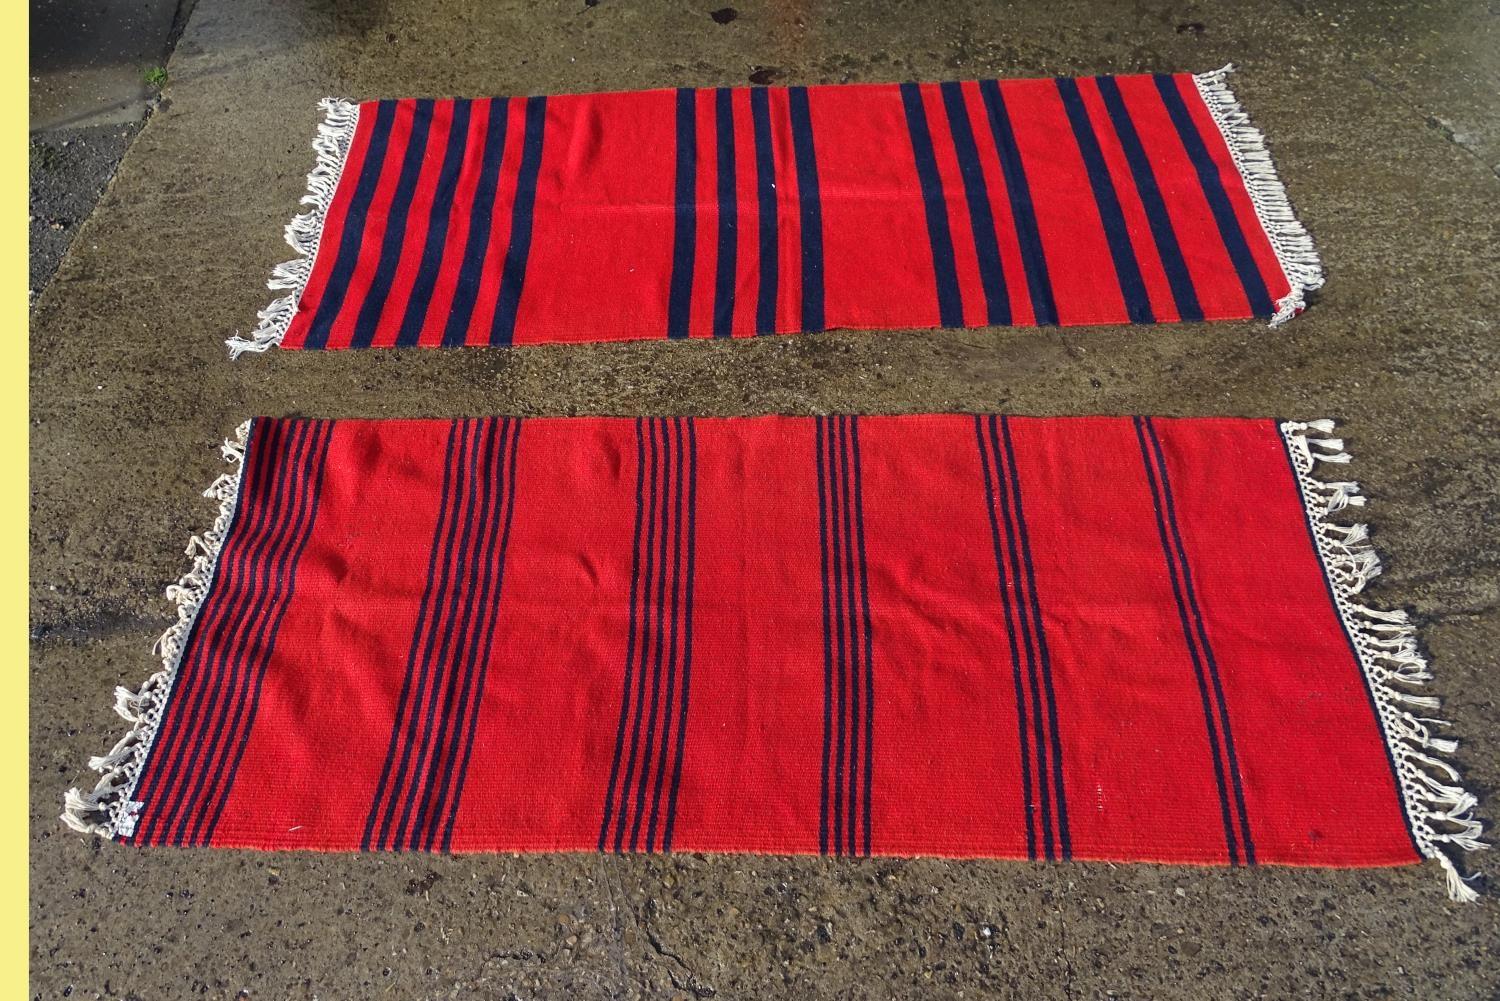 Two hand woven rugs / runners with red and navy blue stripes. One with label designed and hand woven